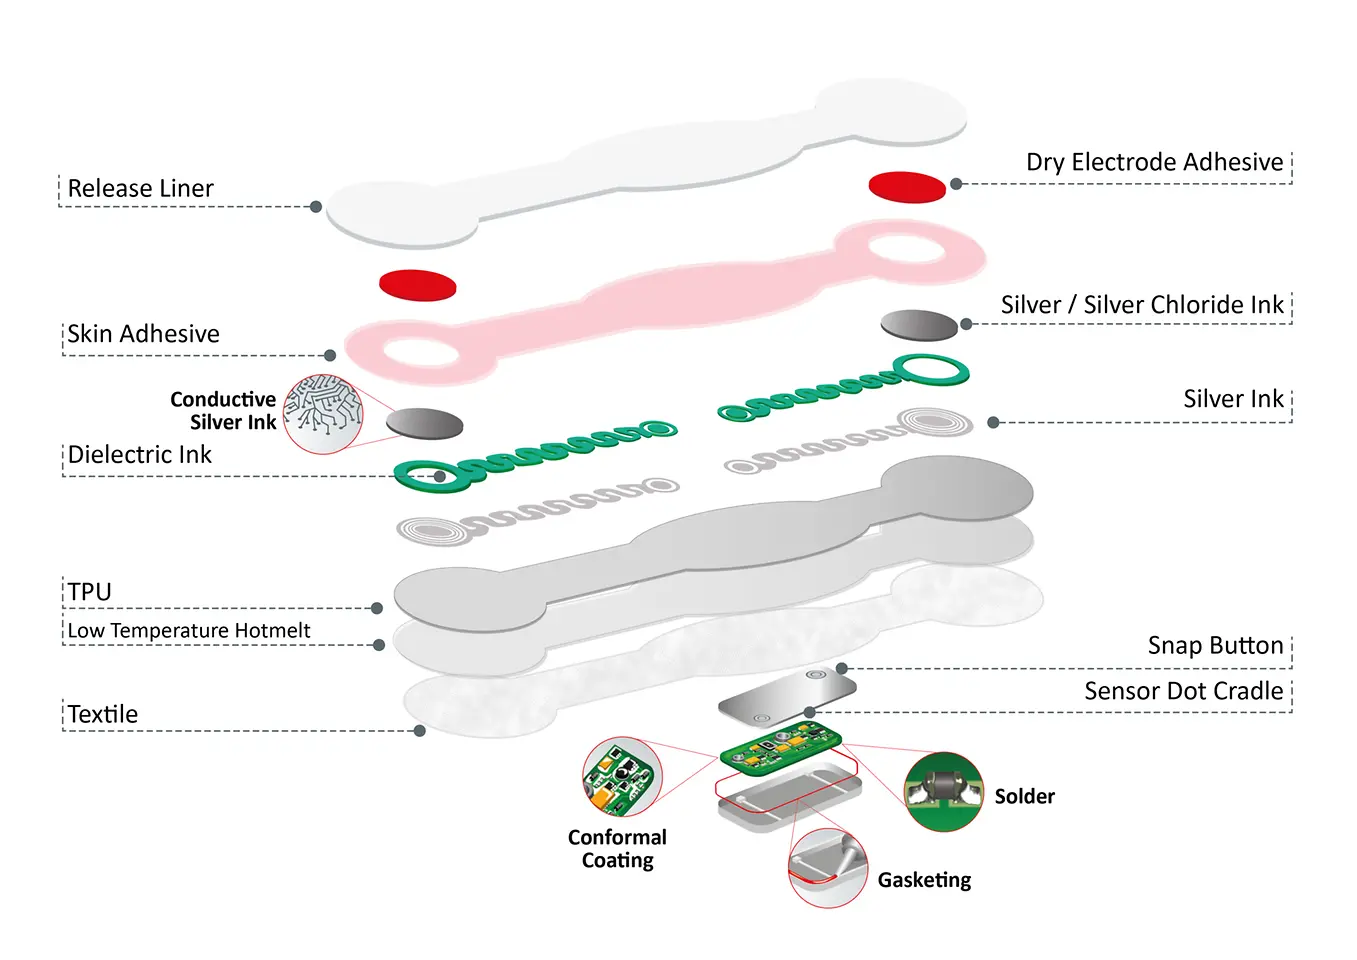 The image displays all components of a Henkel medical sensor: release liner, dry electrode adhesive, skin adhesive, silver chloride ink, dieletric ink, silver ink, TPU, textile, snap button, sensor dot cradle